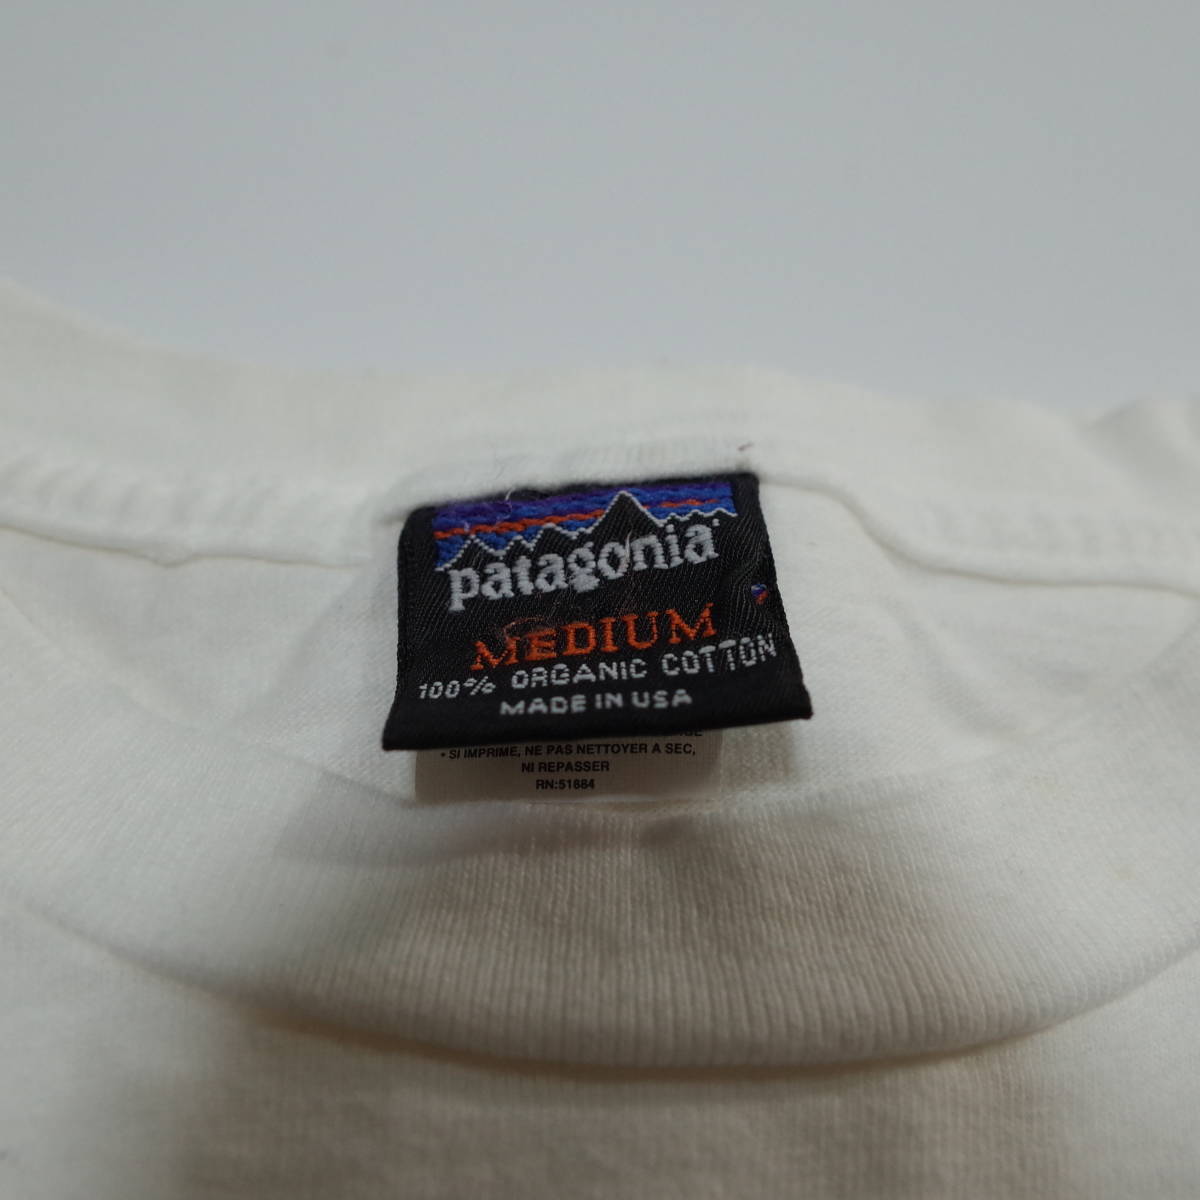 patagonia パタゴニア Waves are Borrowed Memories Owned レア Tシャツ 90S 初期 vintage ヴィンテージ